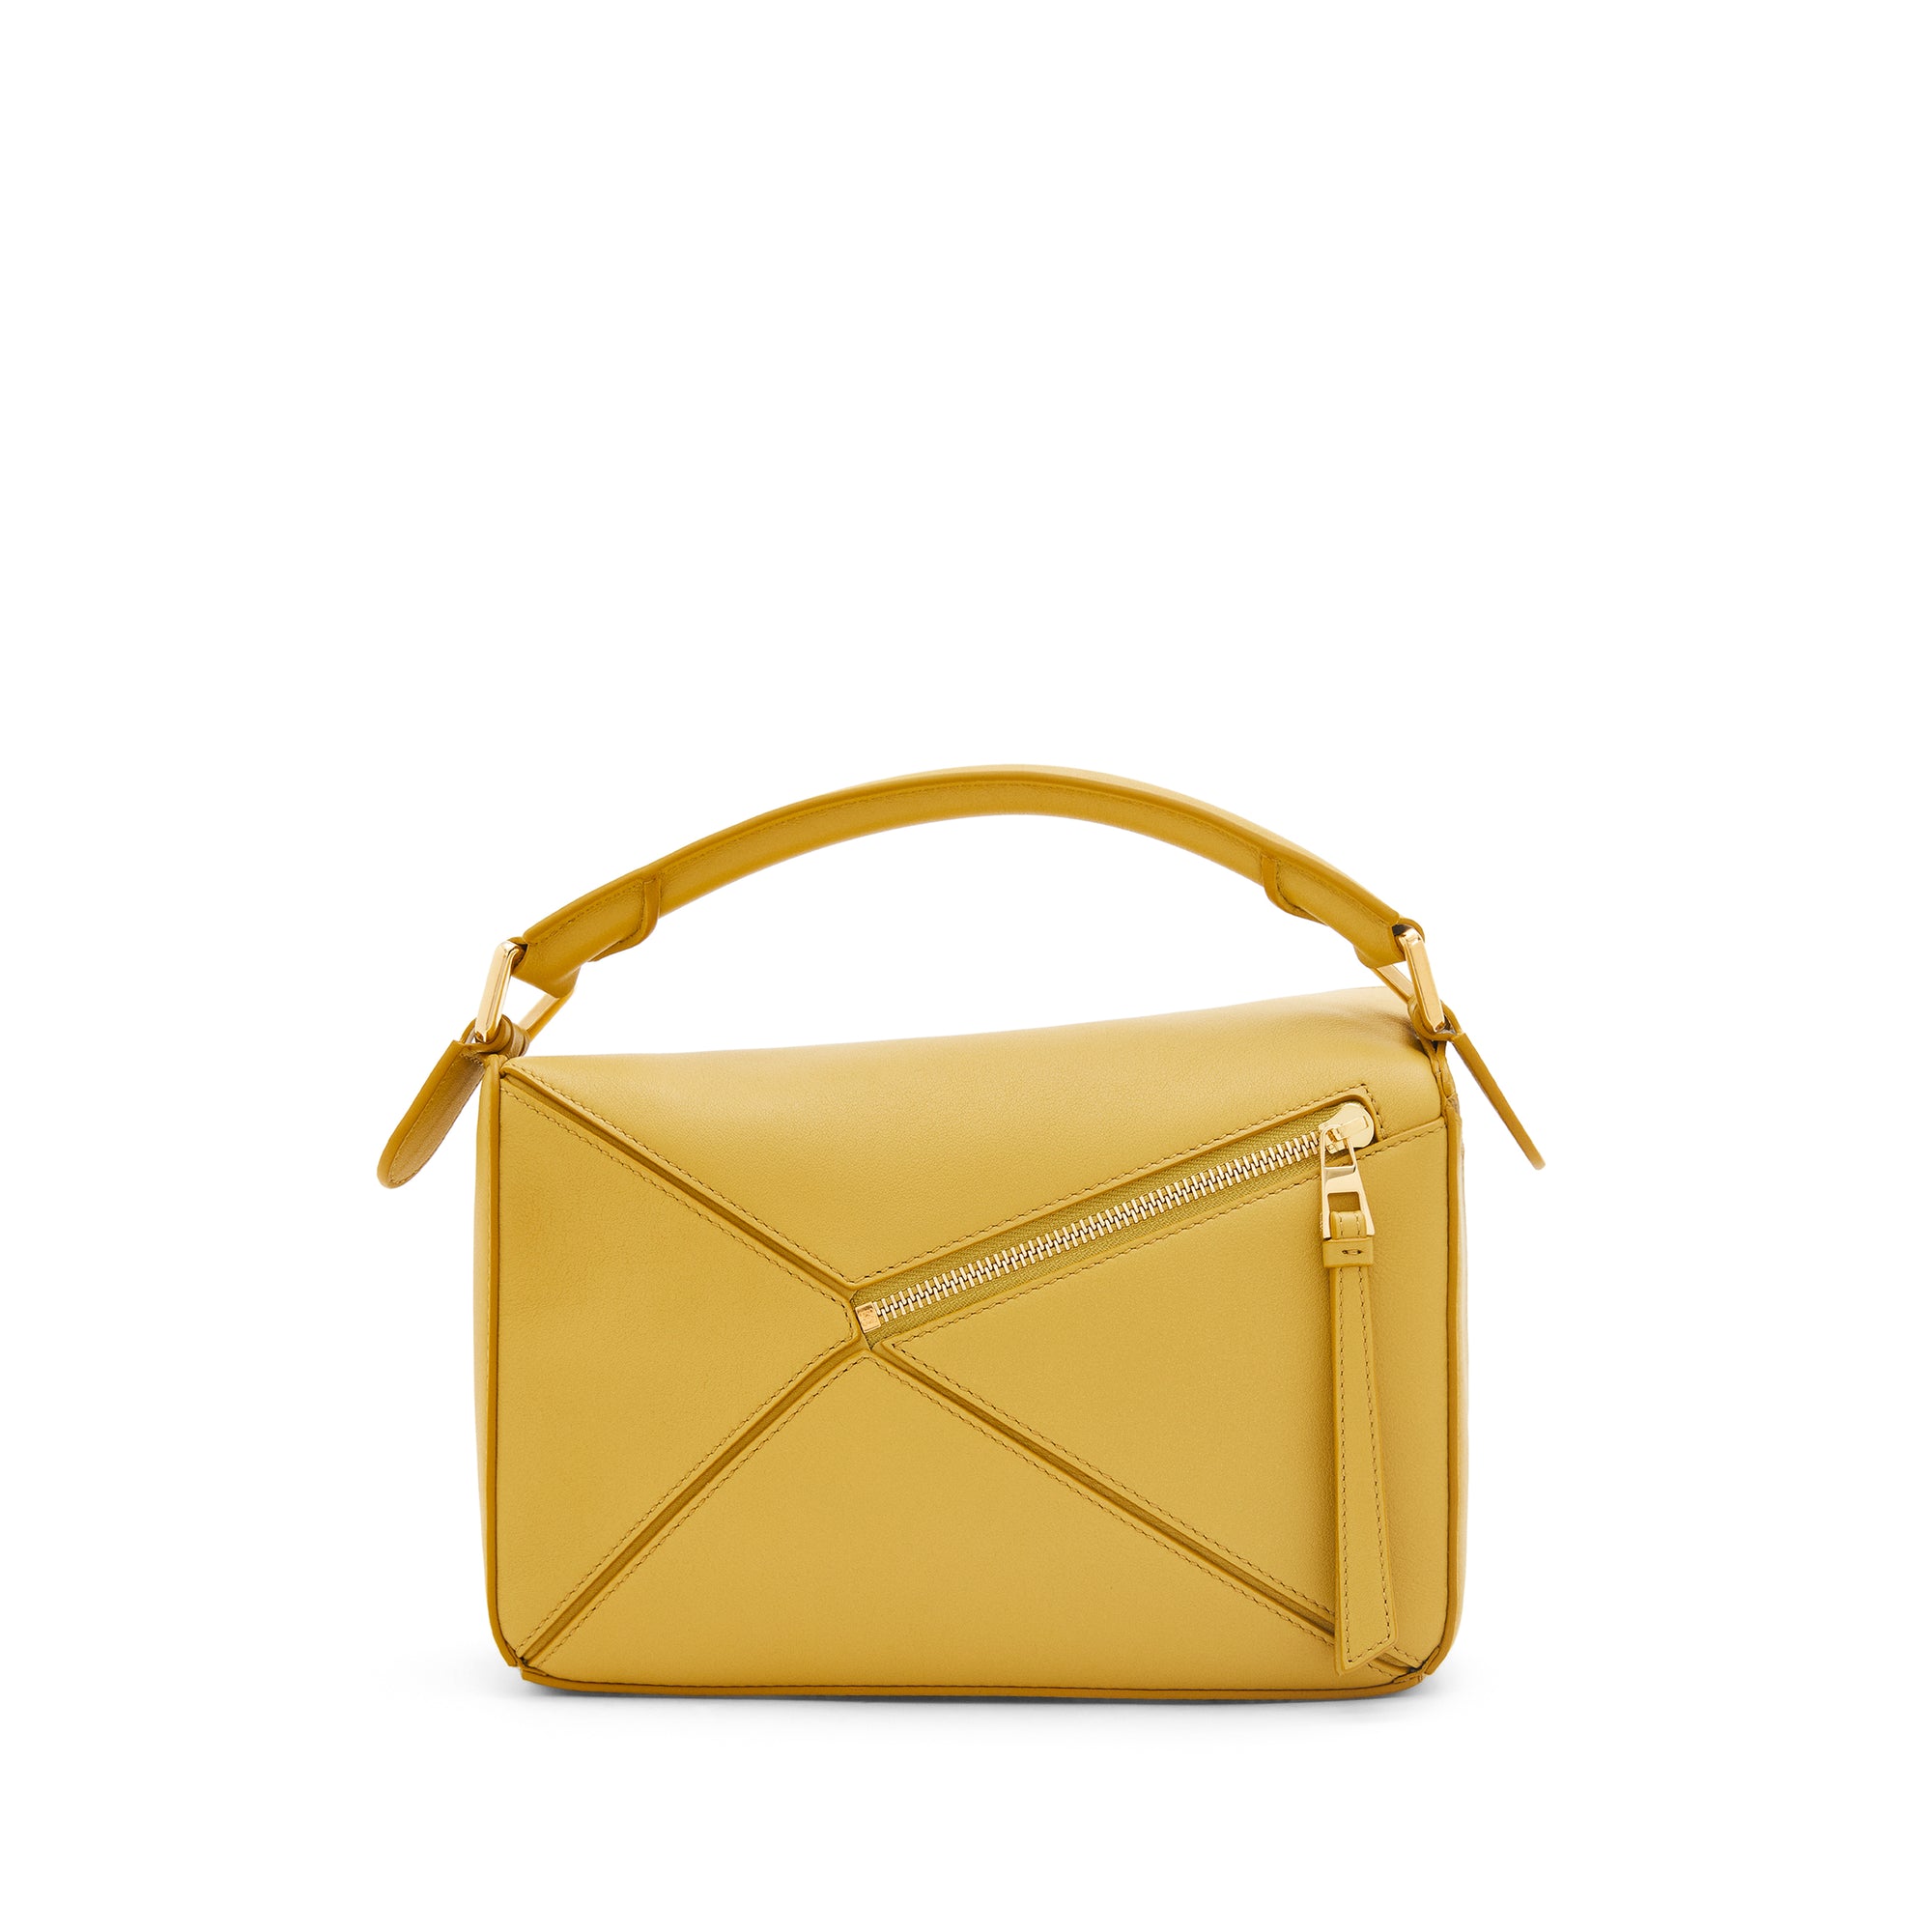 Loewe - Women’s Puzzle Small Bag - (Bright Ochre) view 6